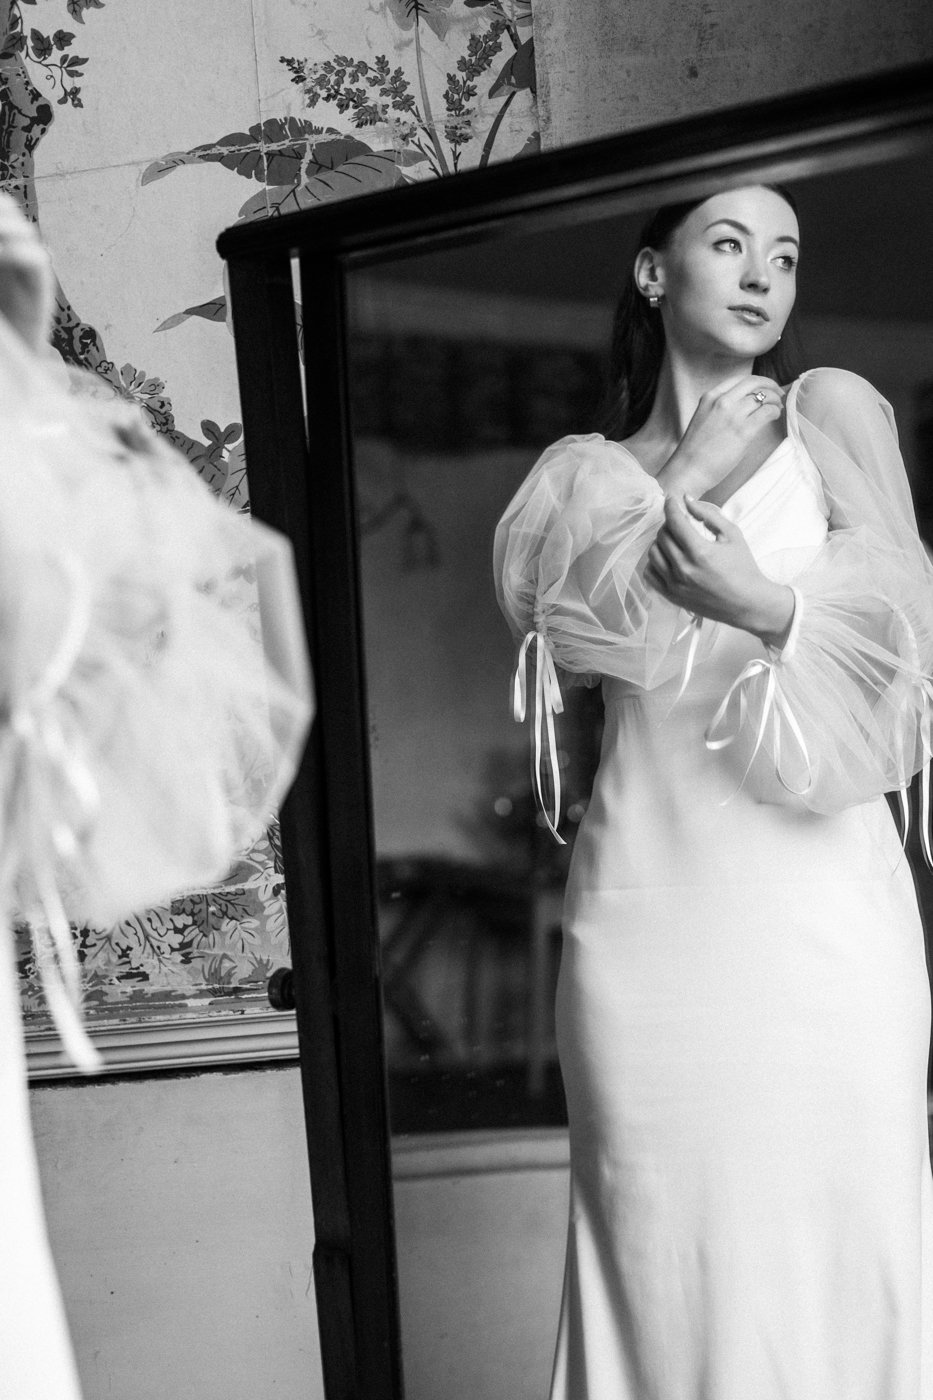 Reflection in a mirror of the Bride